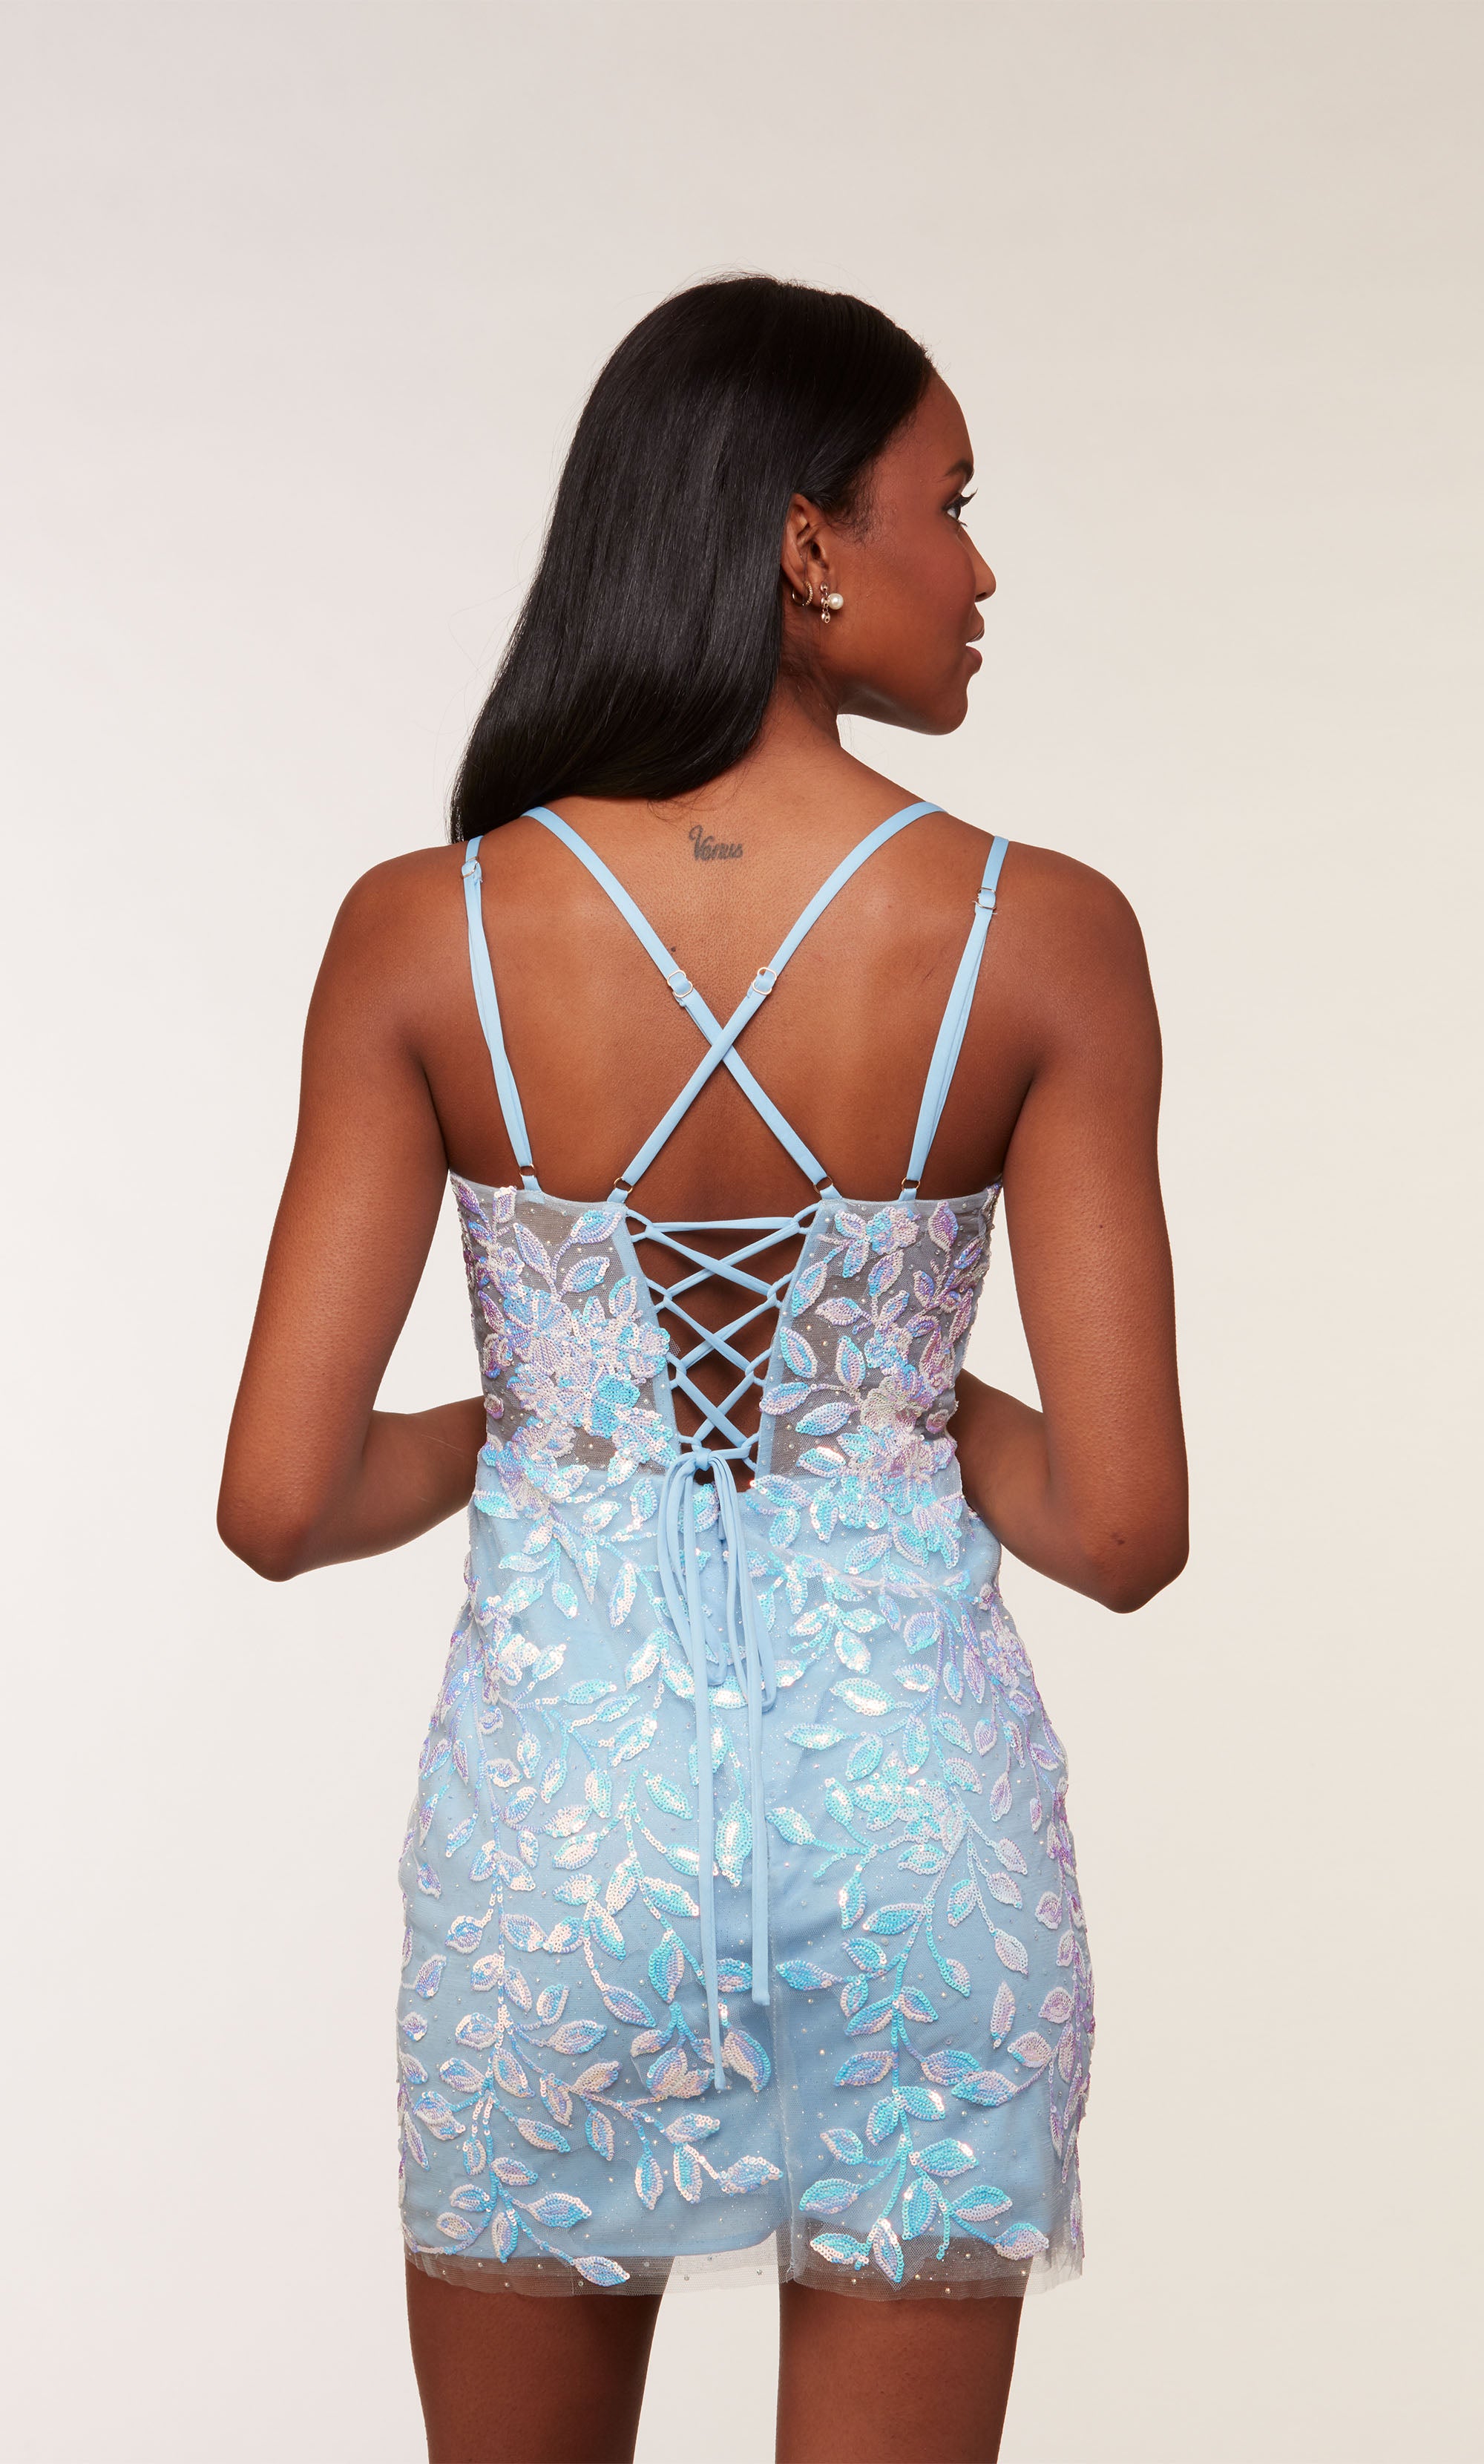 A light blue, fitted short designer dress with a plunging neckline, a sheer bodice, and iridescent sequin embellished floral appliques throughout. 